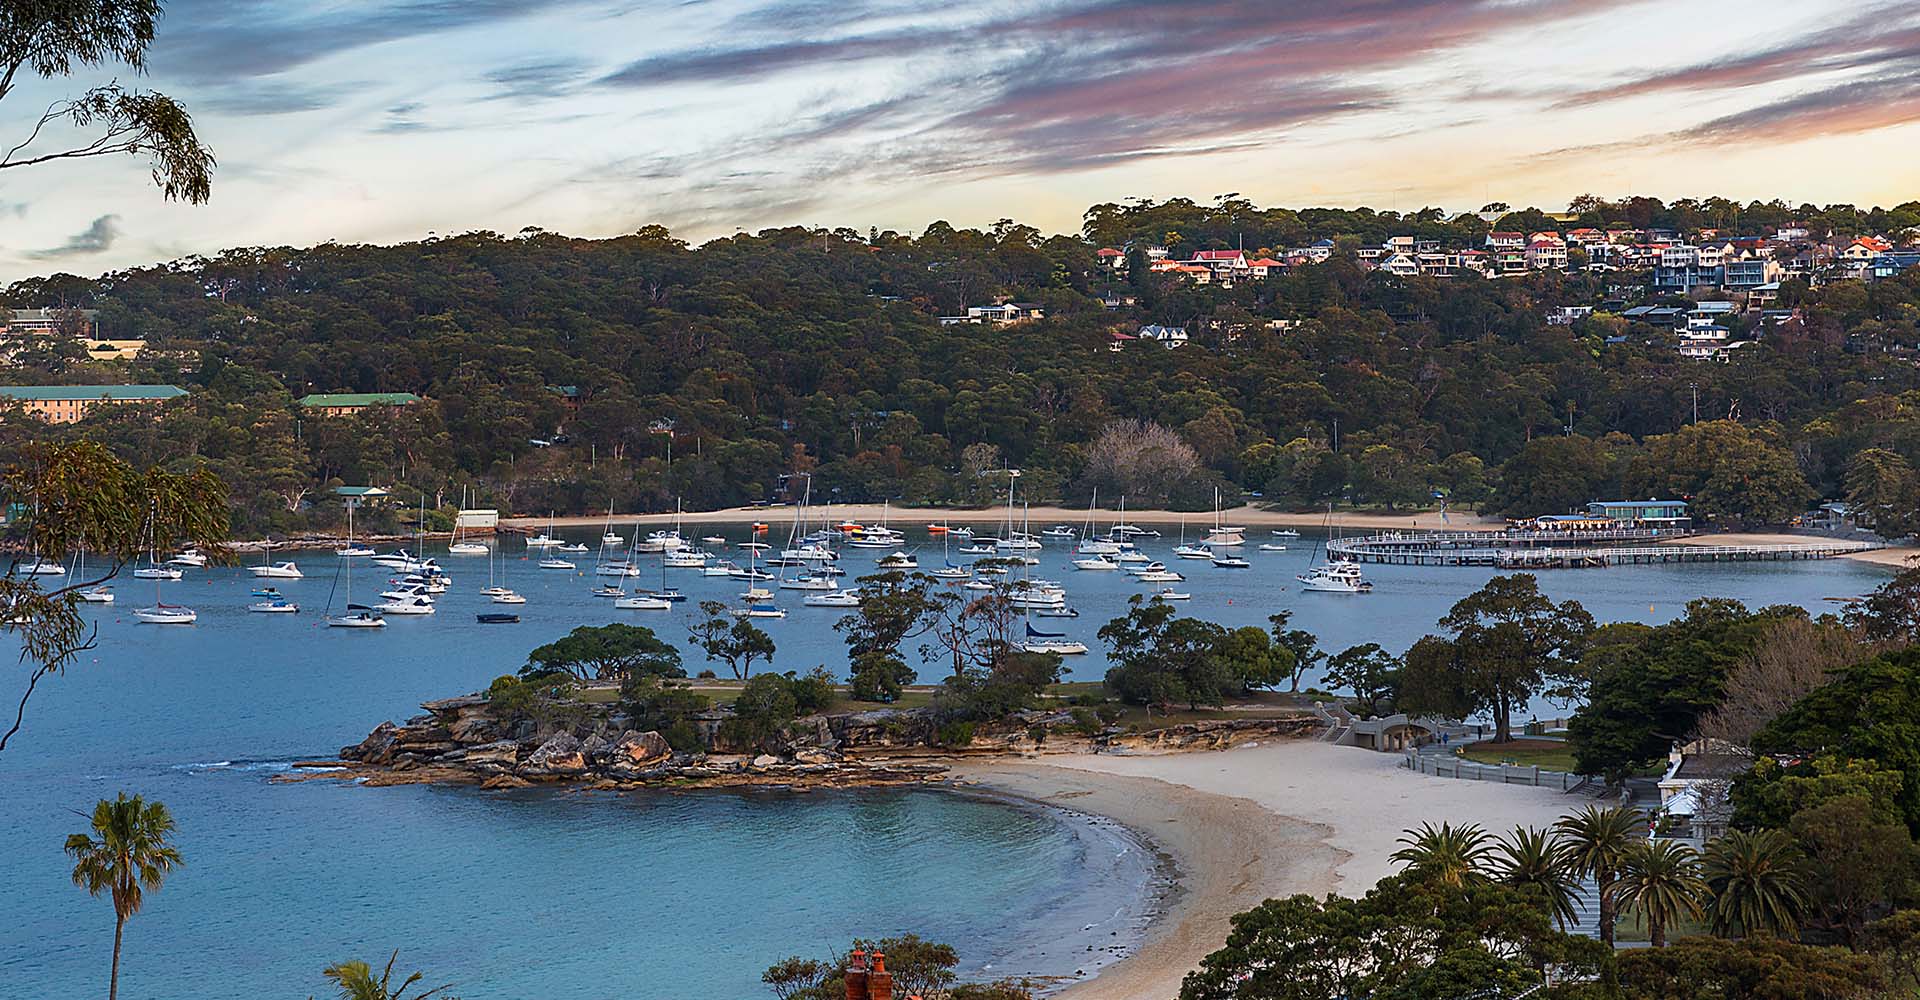 How has lockdown affected the Mosman property market